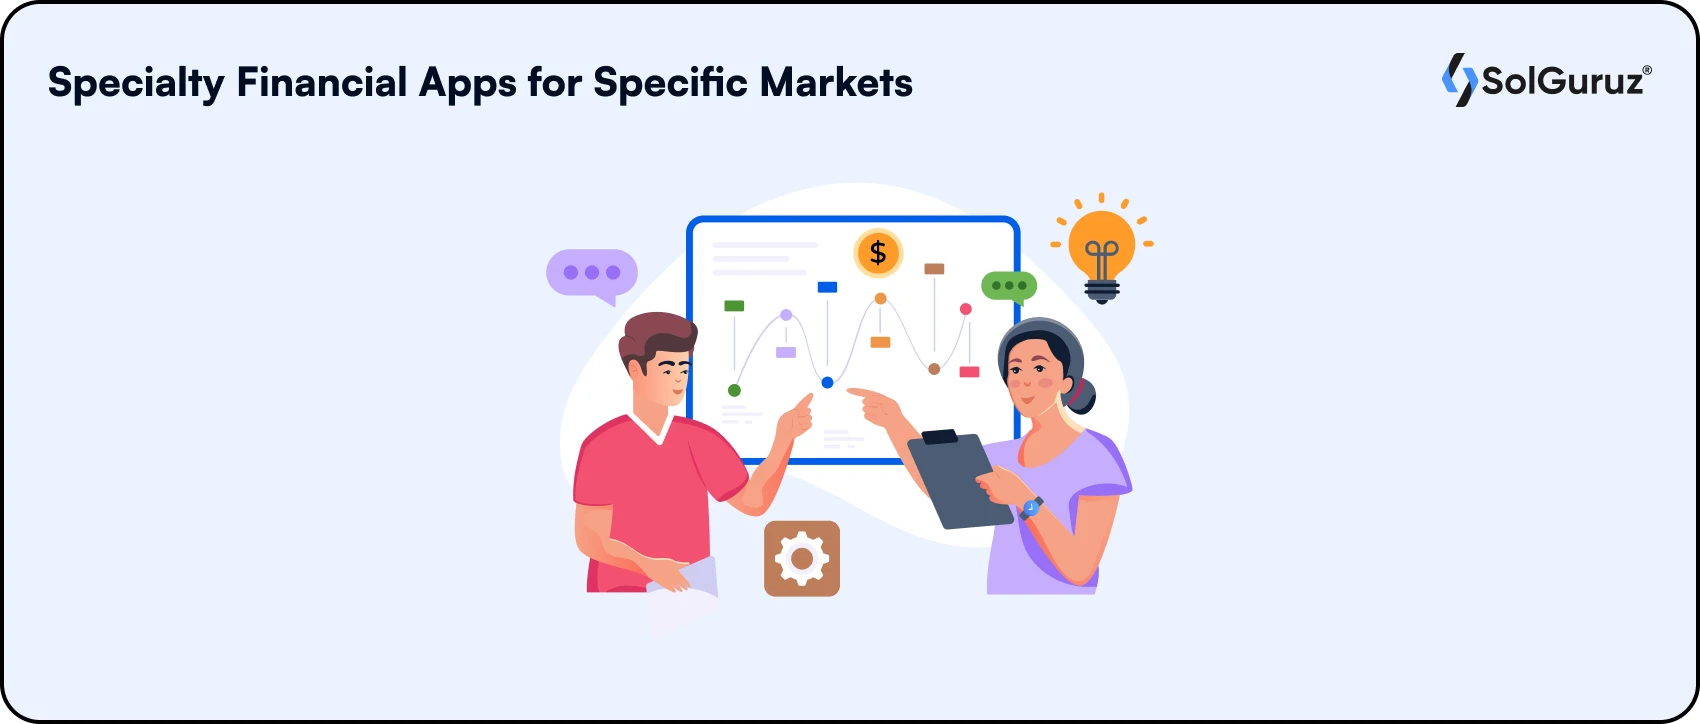 Specialty Financial Apps for Specific Markets